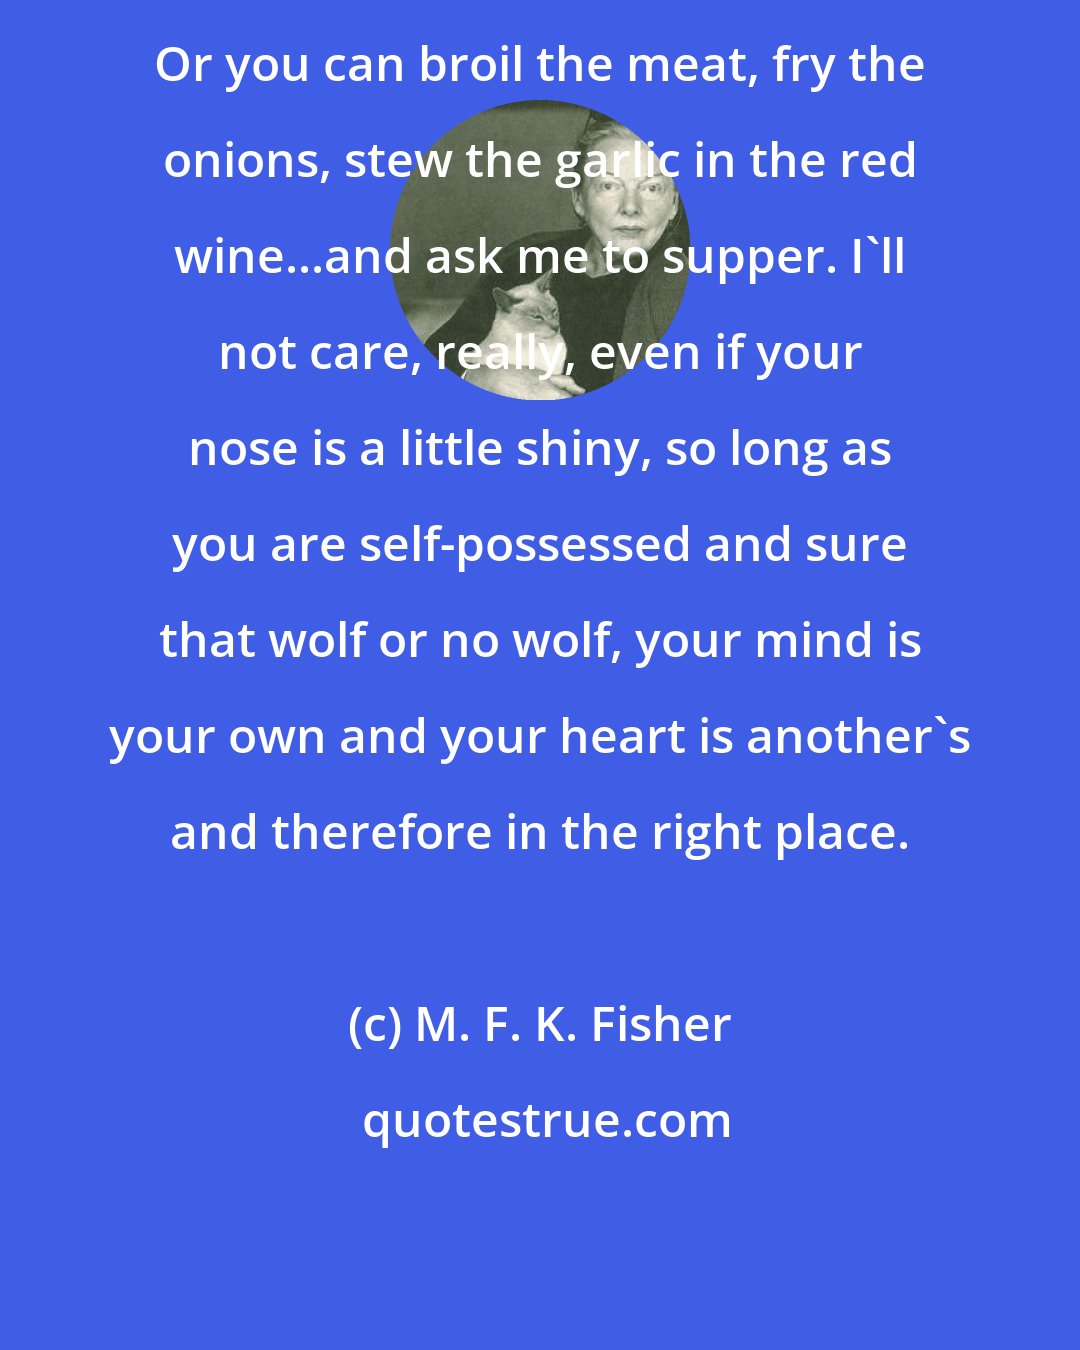 M. F. K. Fisher: Or you can broil the meat, fry the onions, stew the garlic in the red wine...and ask me to supper. I'll not care, really, even if your nose is a little shiny, so long as you are self-possessed and sure that wolf or no wolf, your mind is your own and your heart is another's and therefore in the right place.